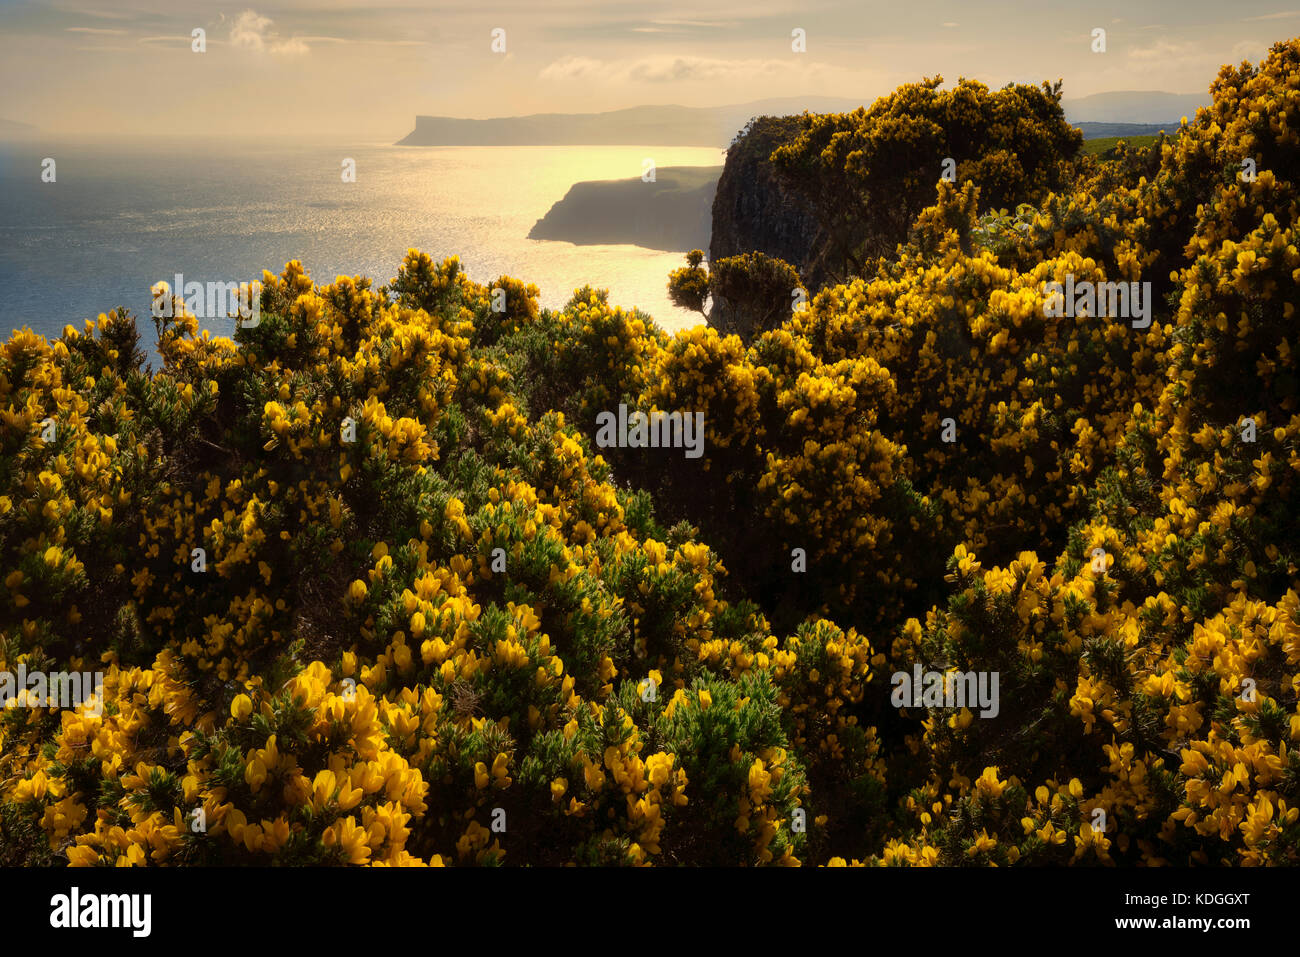 blooming gorse and view of coastline from Portaneevey Viewpoint. Northern ireland Stock Photo